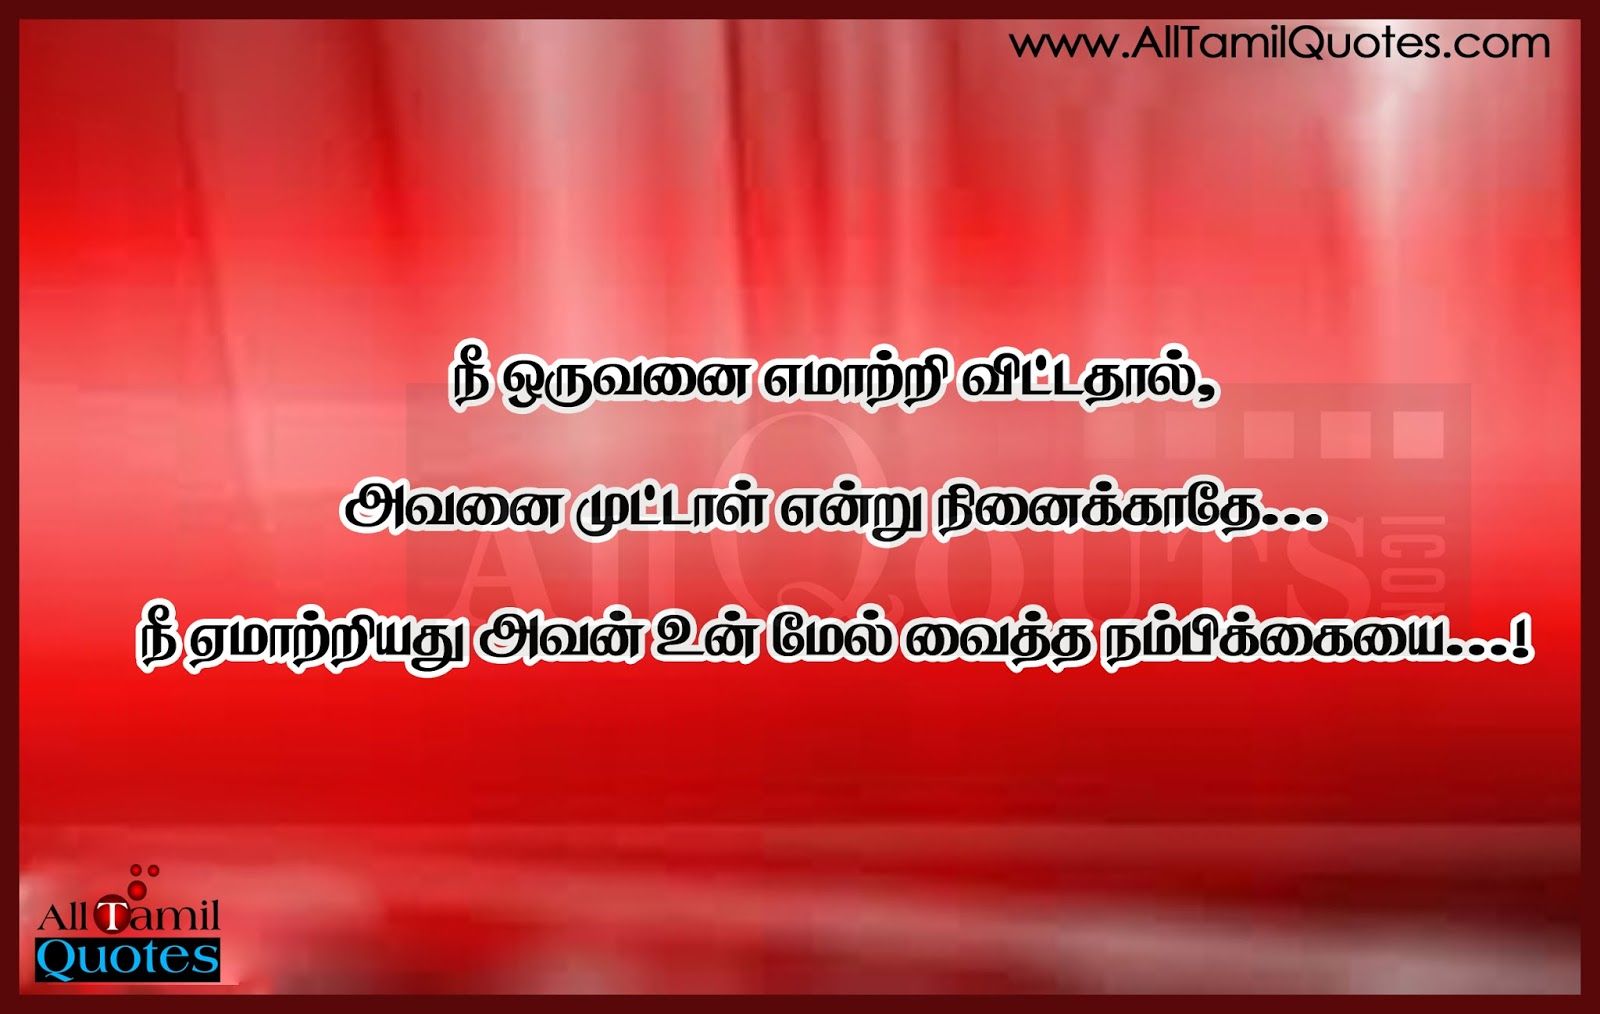 Life Tamil Quotes and Thoughts